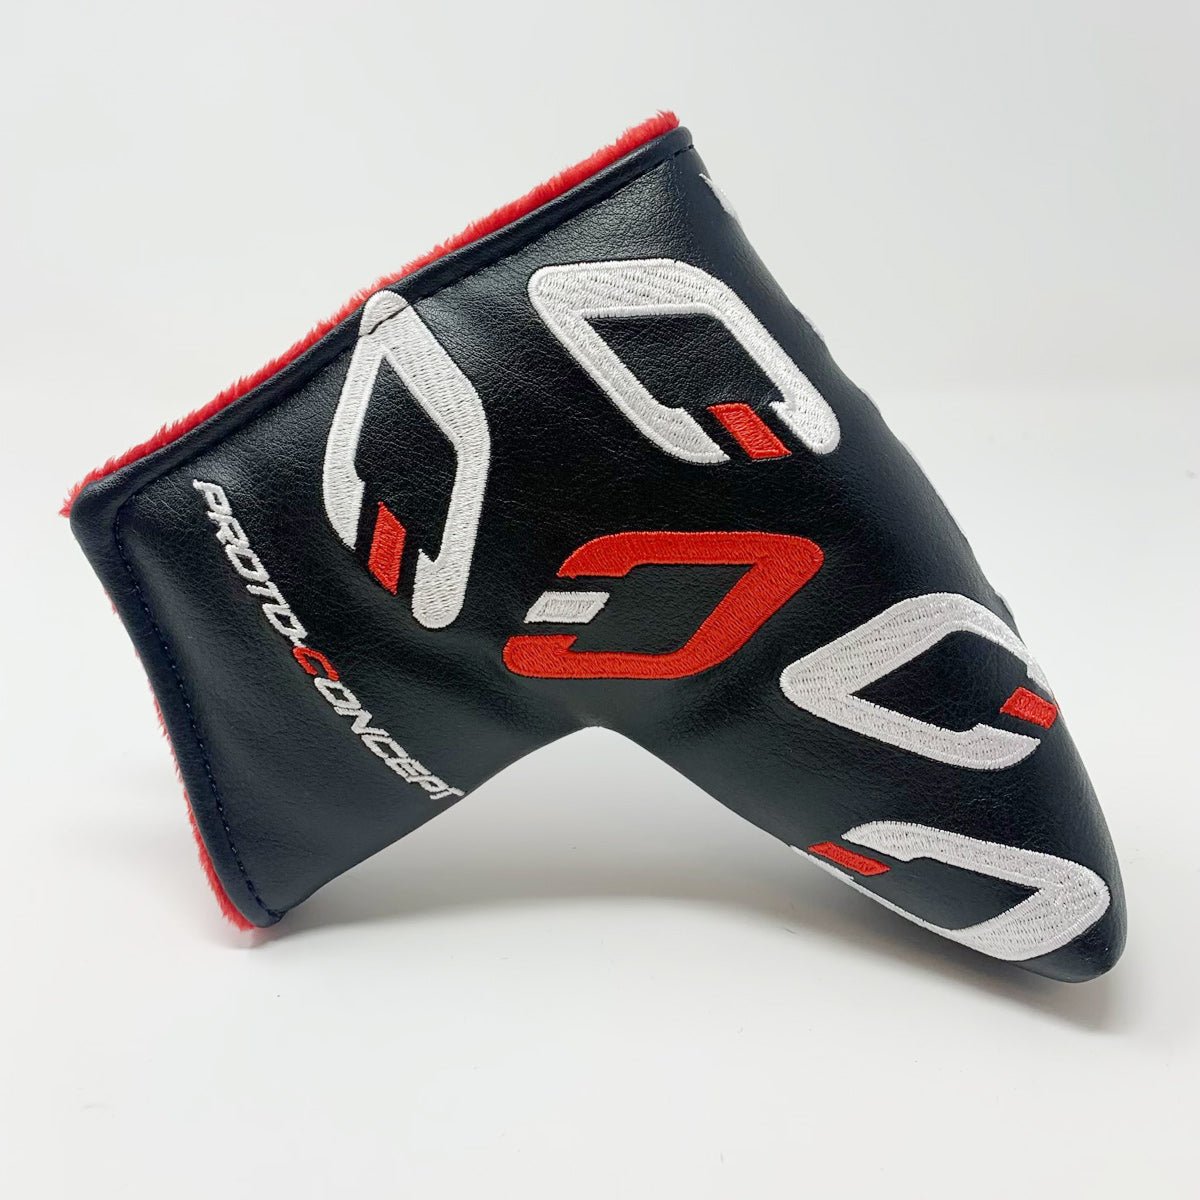 PROTOCONCEPT Golf, Putter cover - 2